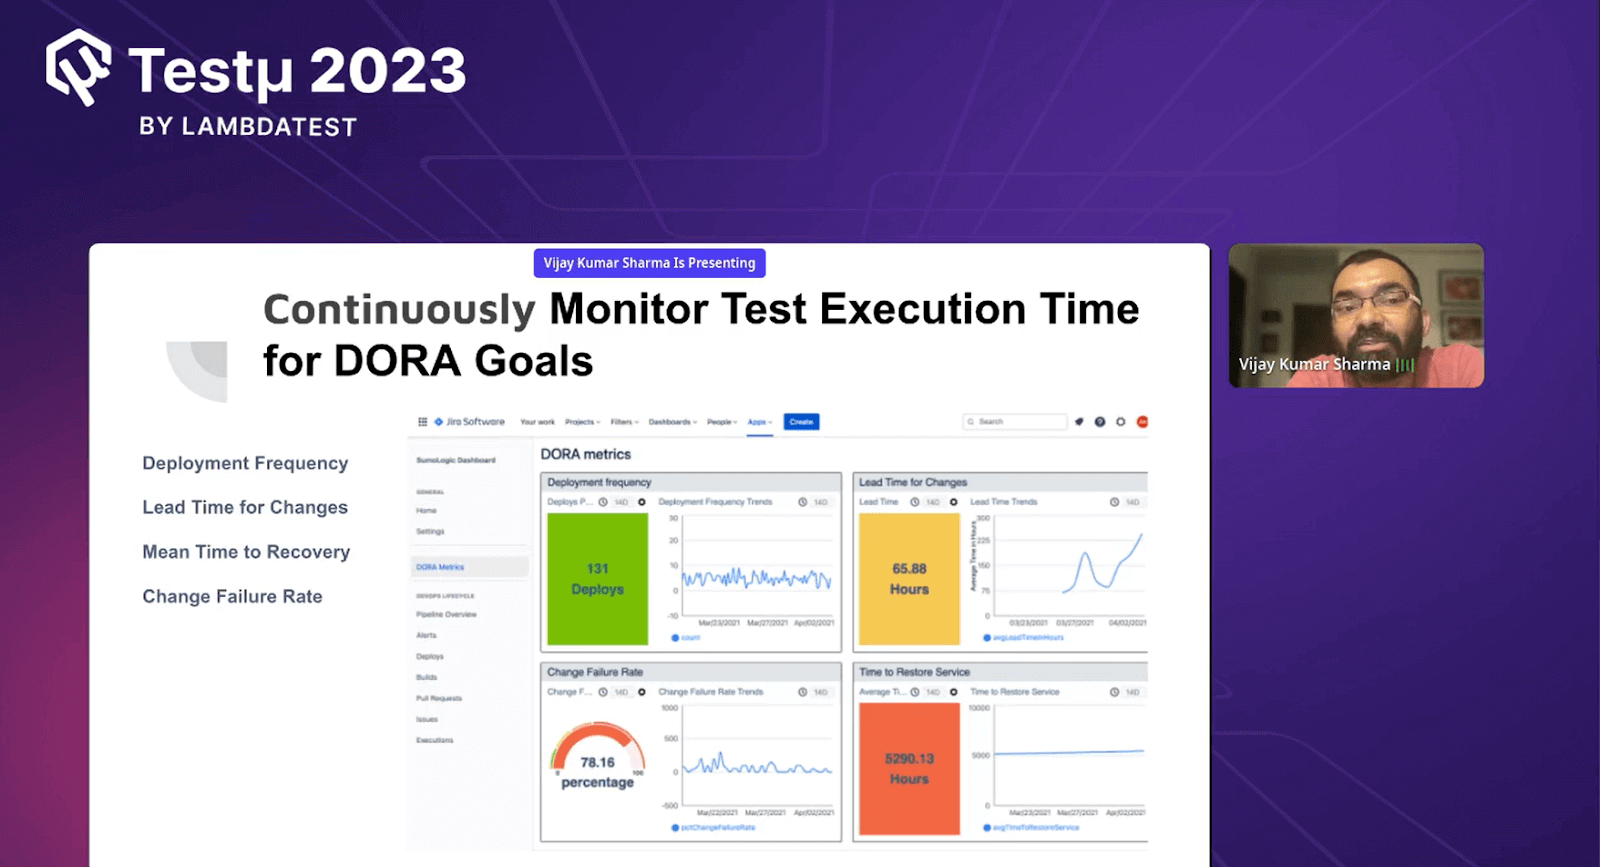 Continuously monitor test execution time for DORA goals